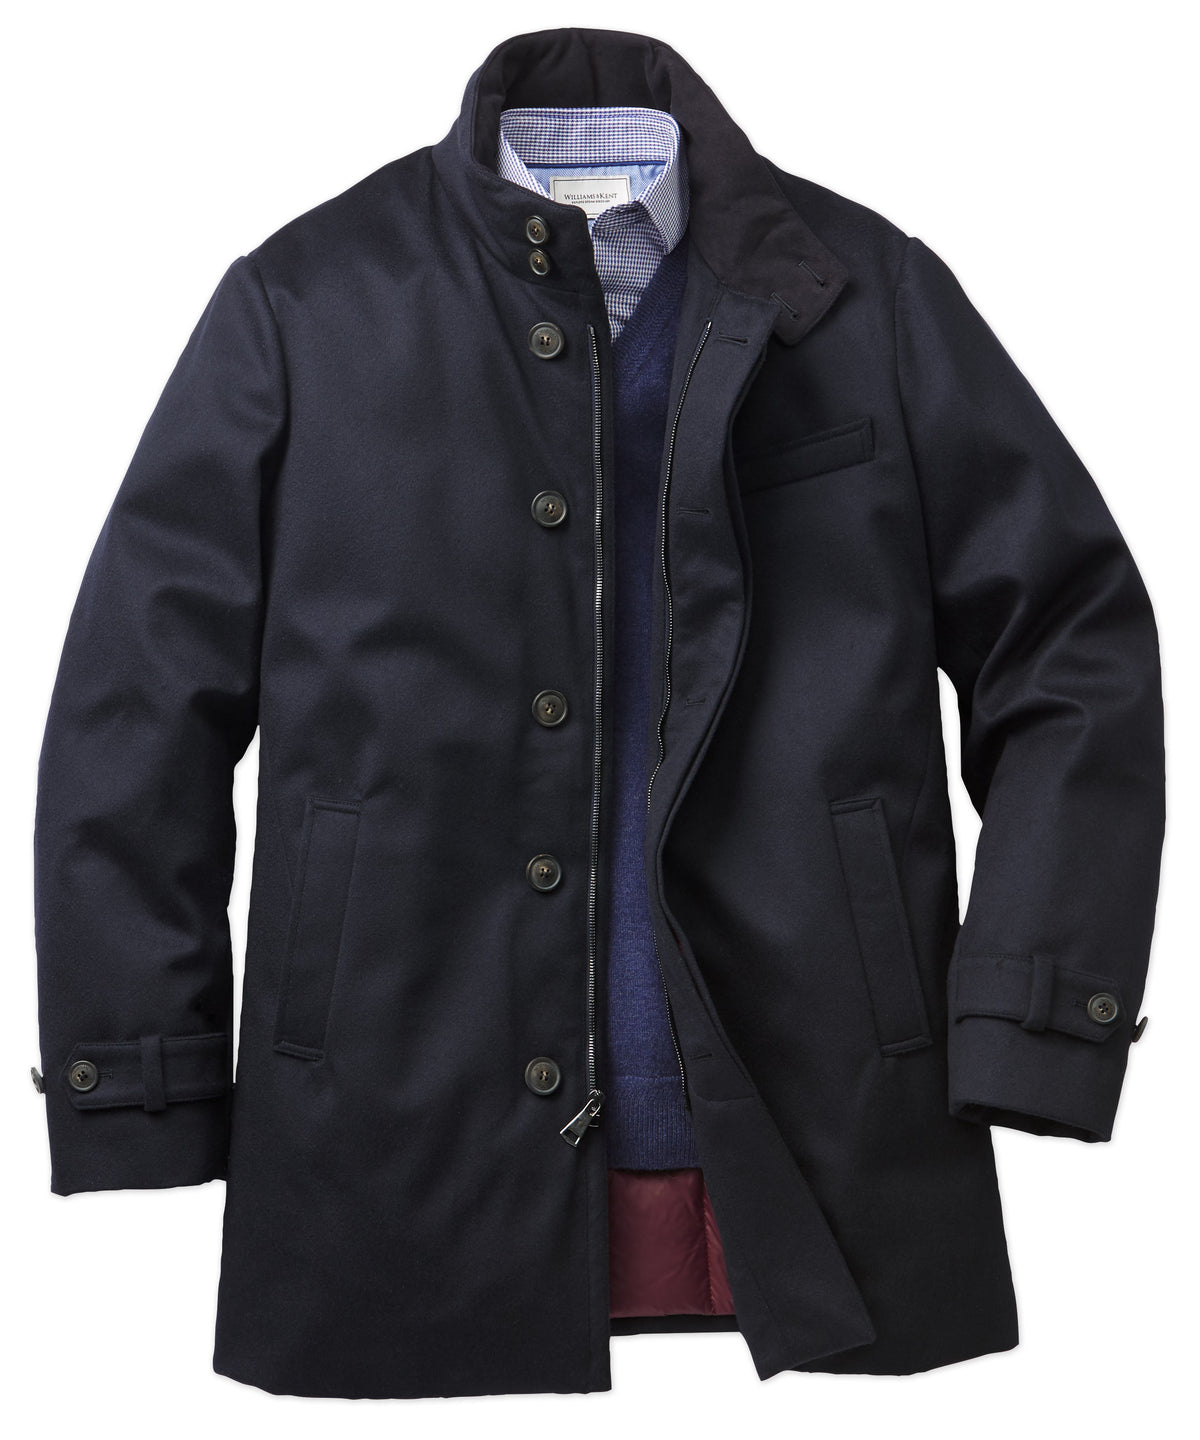 Waterproof Italian Cashmere Car Coat with Down Insulation